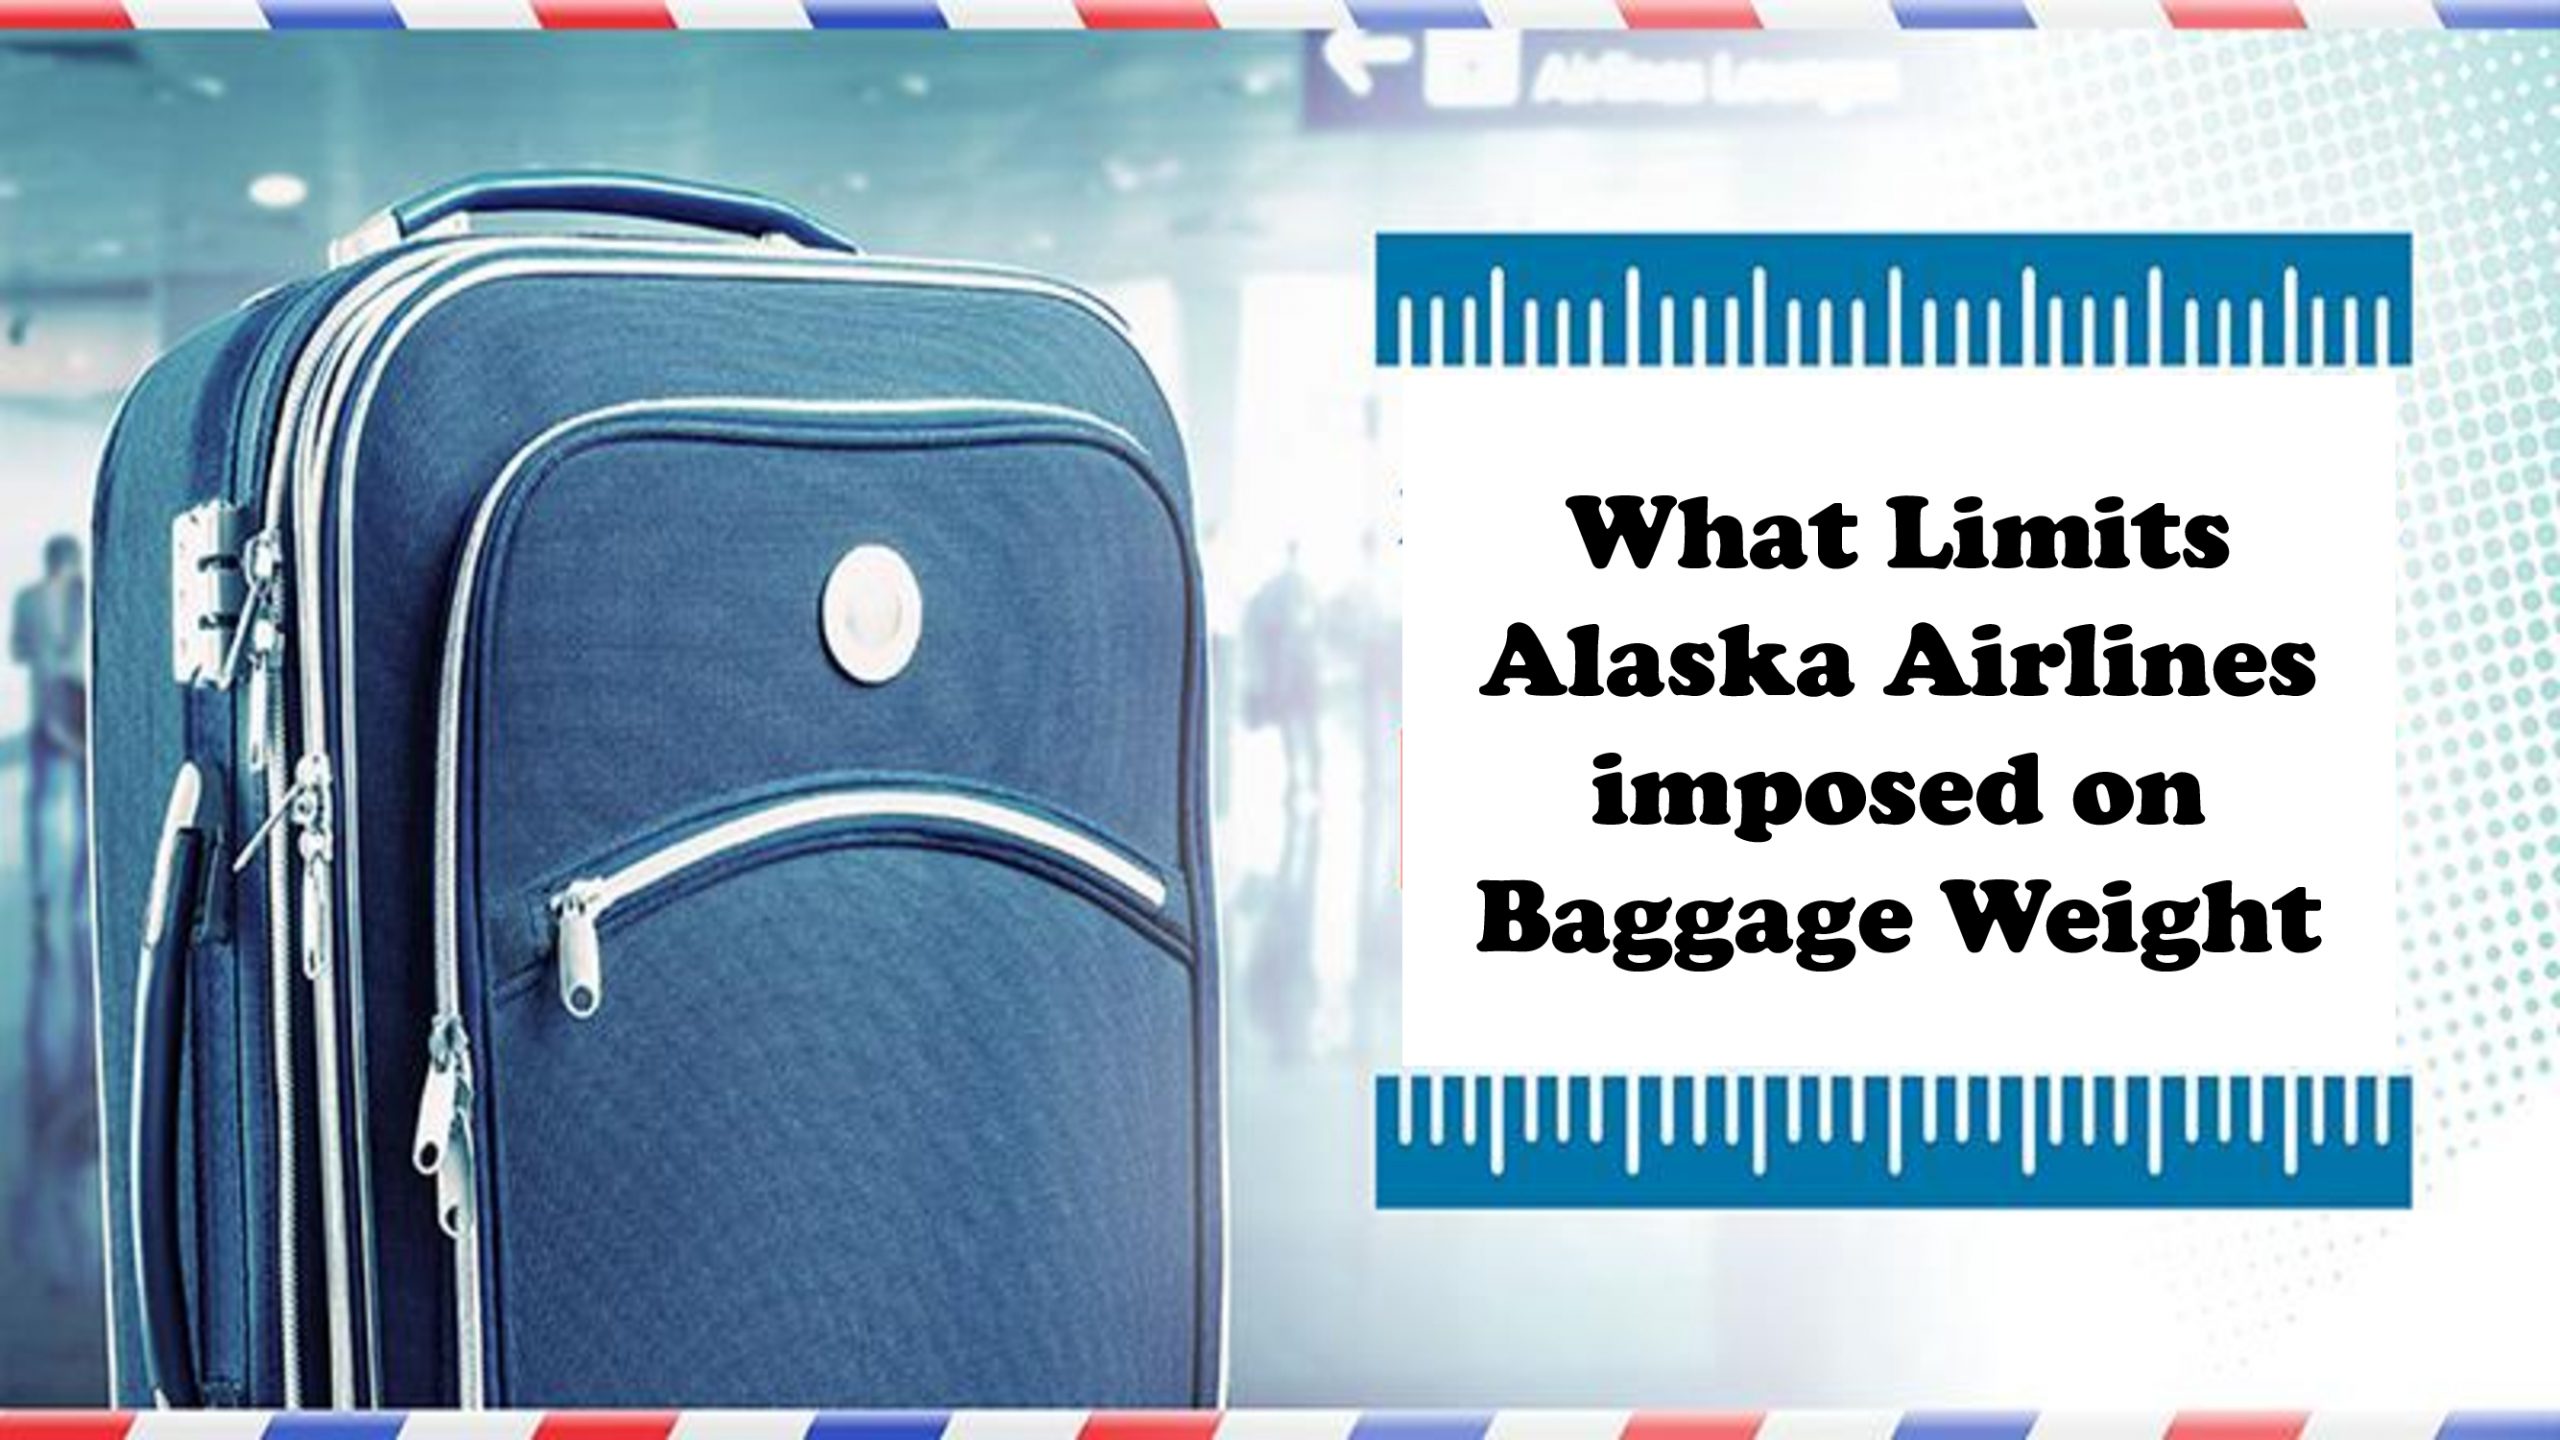 What limits Alaska Airlines imposed on baggage weight